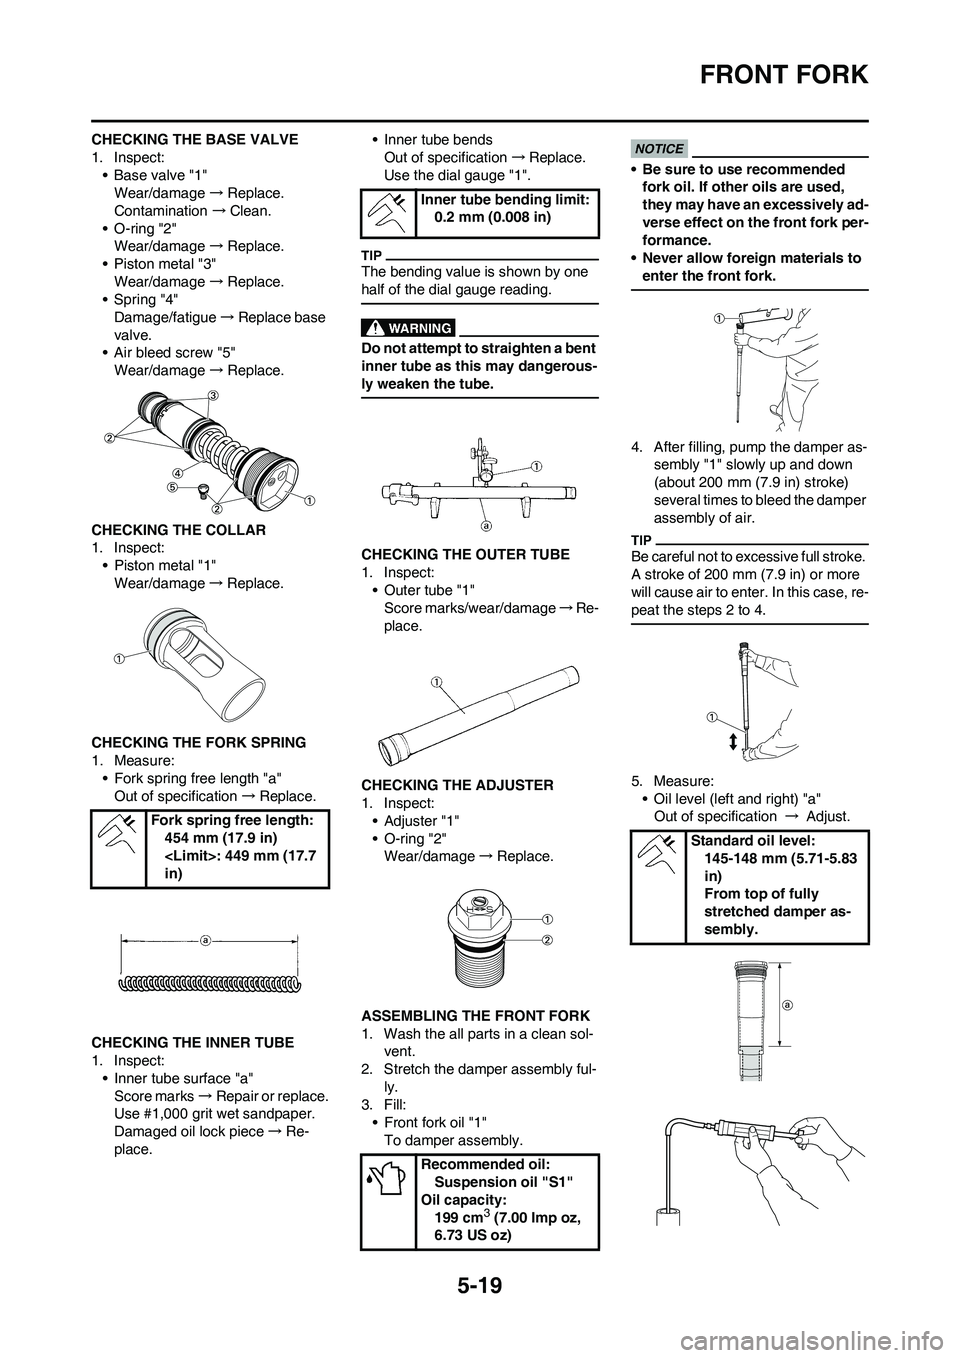 YAMAHA YZ250F 2009  Owners Manual 5-19
FRONT FORK
CHECKING THE BASE VALVE
1. Inspect:
• Base valve "1"
Wear/damage →Replace.
Contamination →Clean.
• O-ring "2"
Wear/damage →Replace.
• Piston metal "3"
Wear/damage →Replac